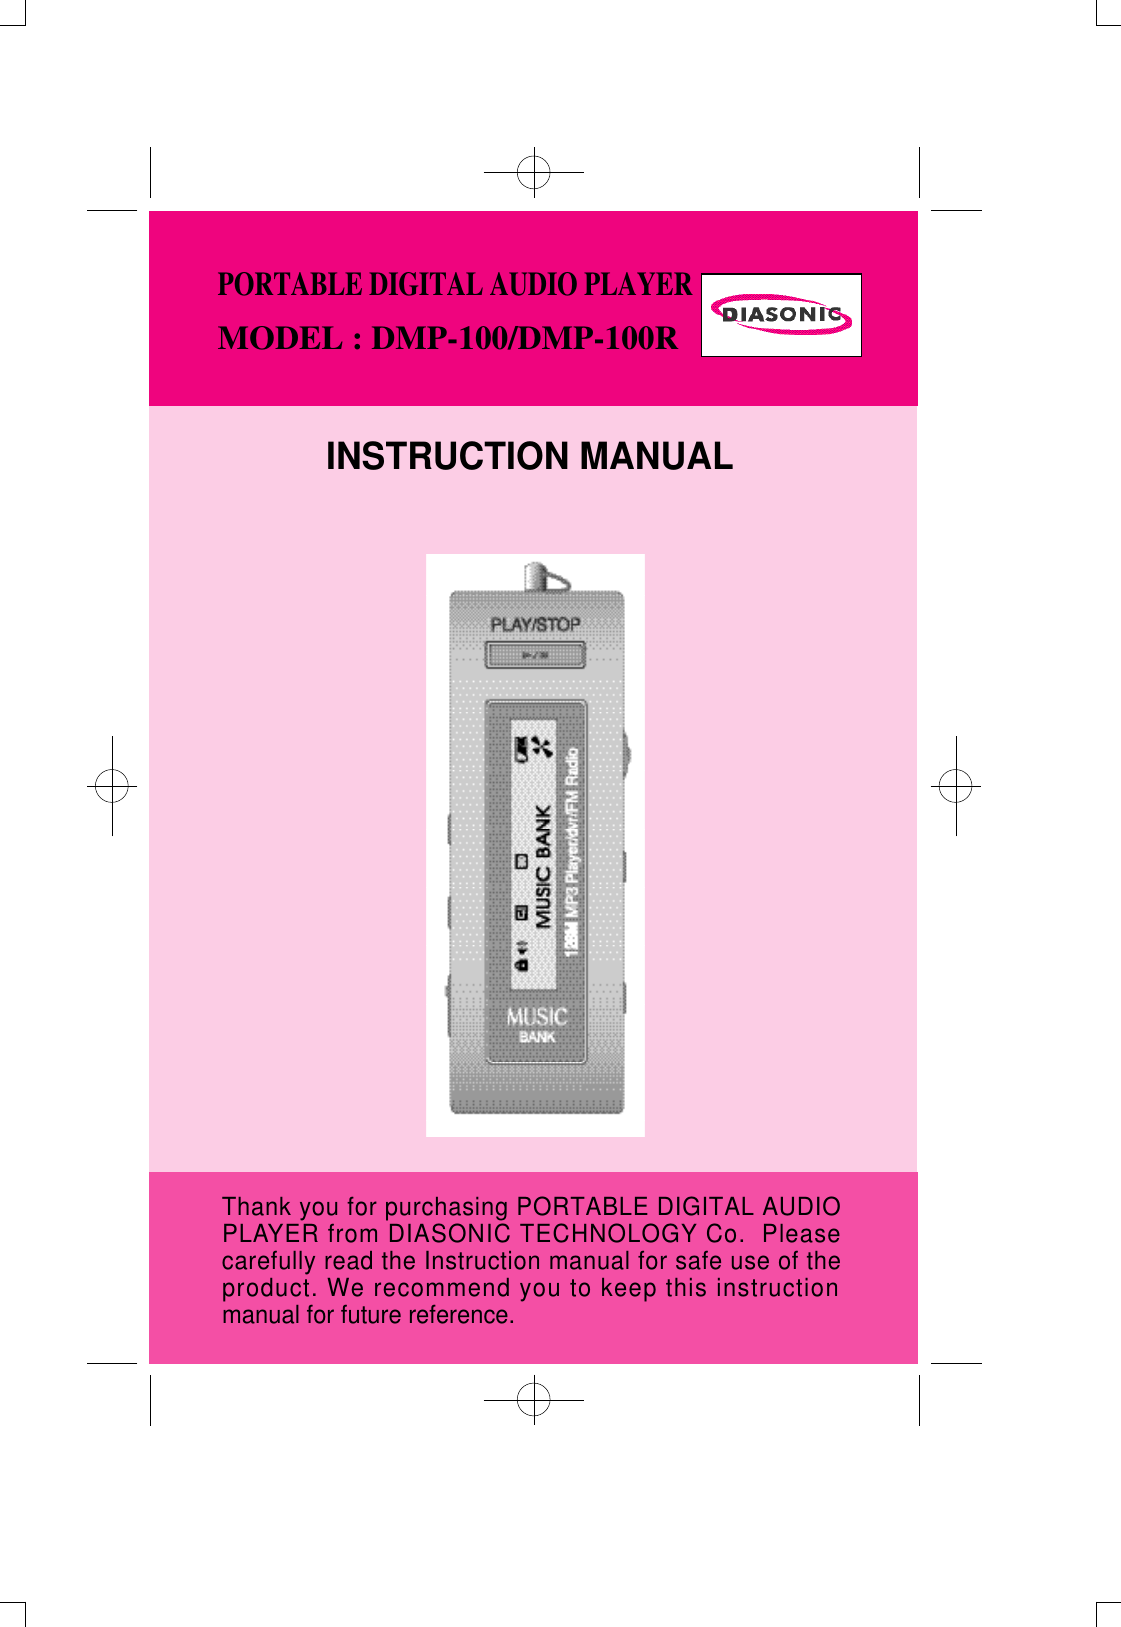 INSTRUCTION MANUALThank you for purchasing PORTABLE DIGITAL AUDIOP L AYER from DIASONIC TECHNOLOGY Co.  Pleasecarefully read the Instruction manual for safe use of theproduct. We recommend you to keep this instructionmanual for future reference.PORTABLE DIGITAL AUDIO PLAYERMODEL : DMP-100/DMP-100R 